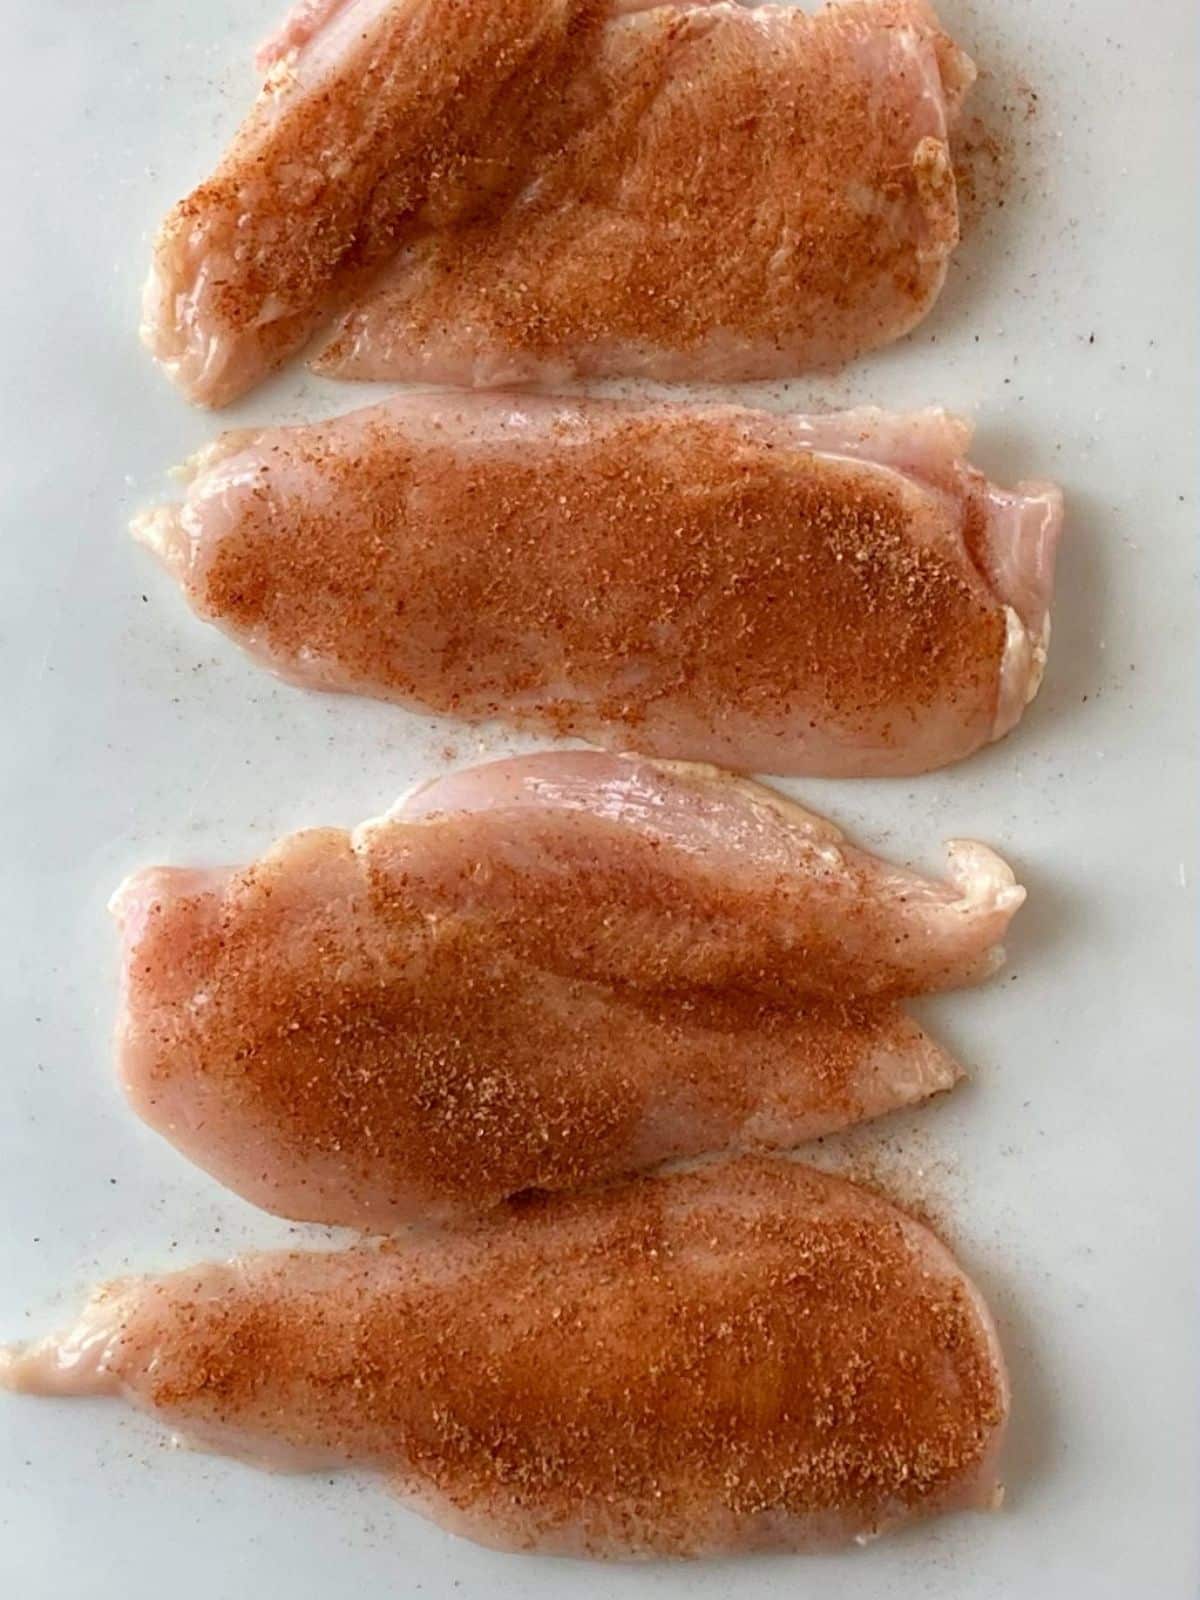 Chicken breasts seasoned with spice mixture.